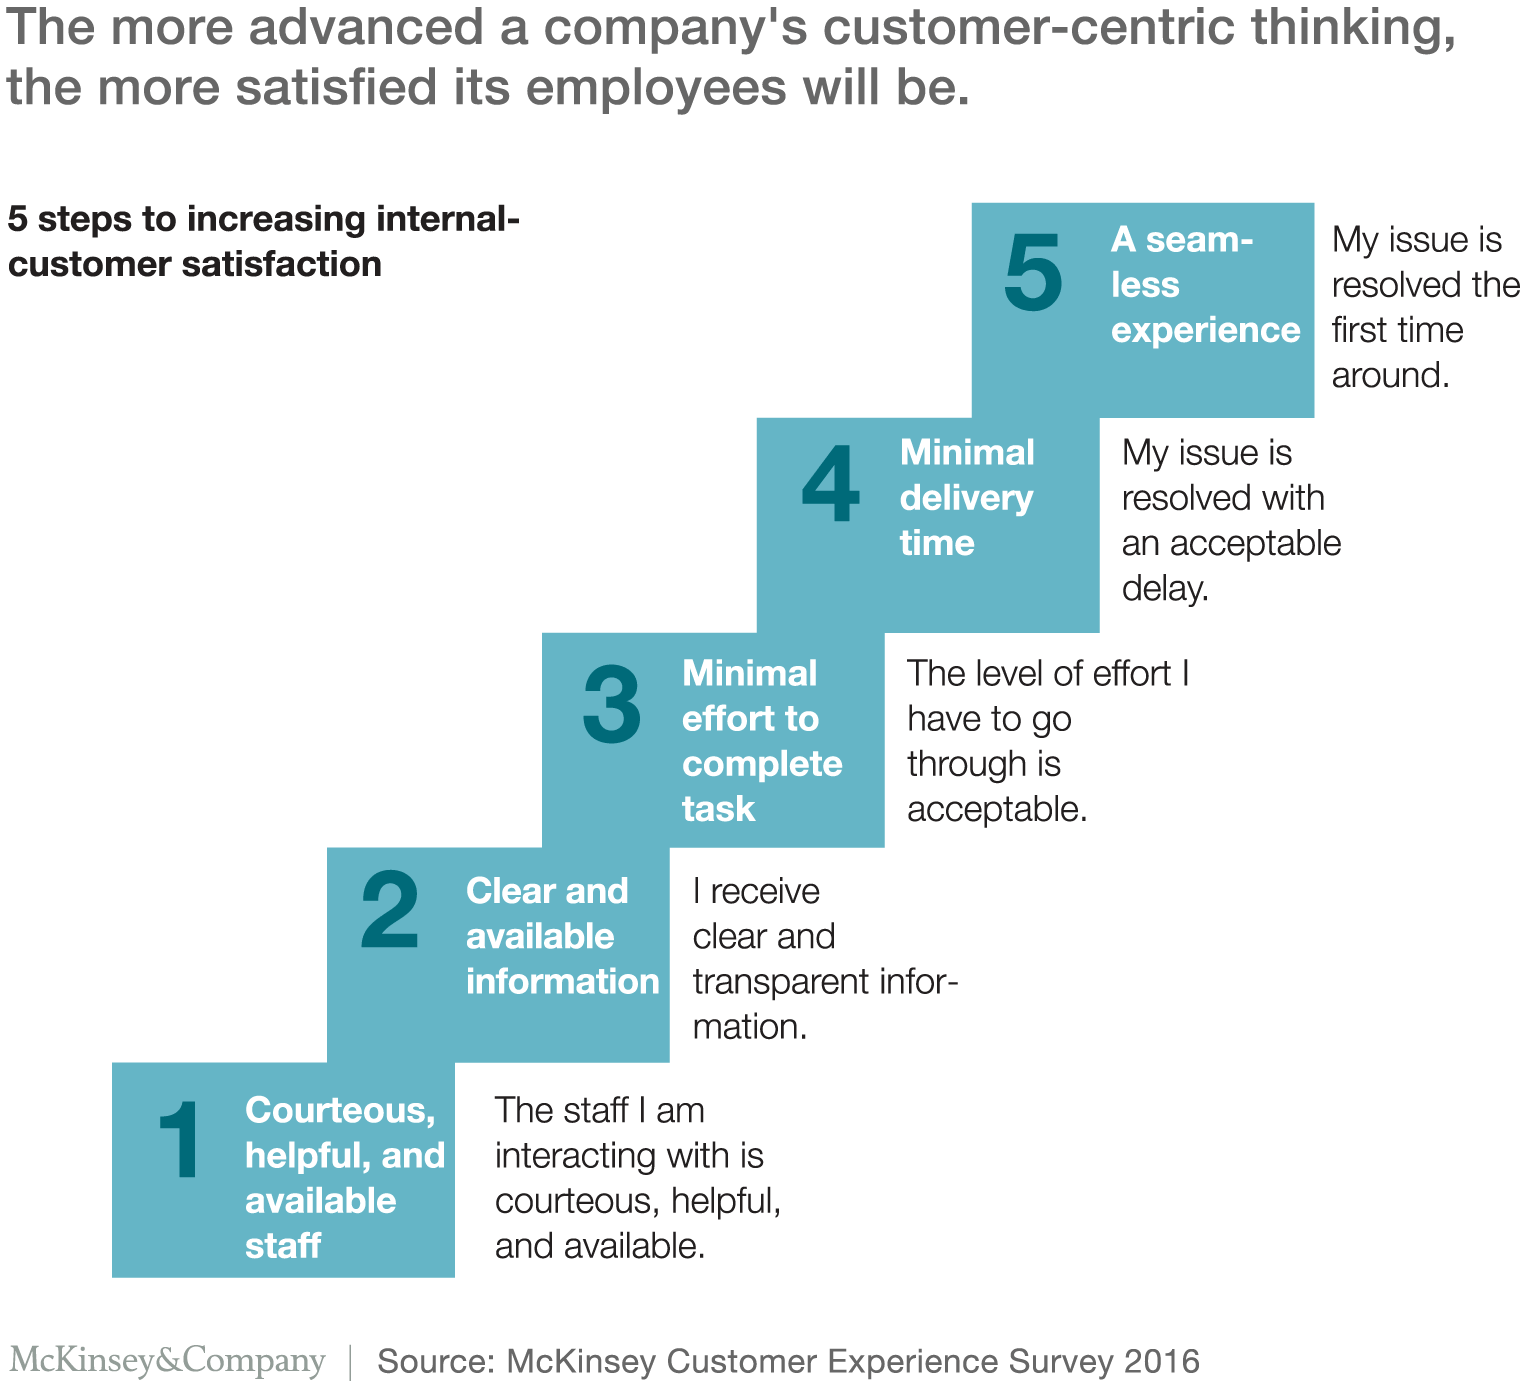 The more advanced a company's customer-centric thinking, the more satisfied its employees will be.